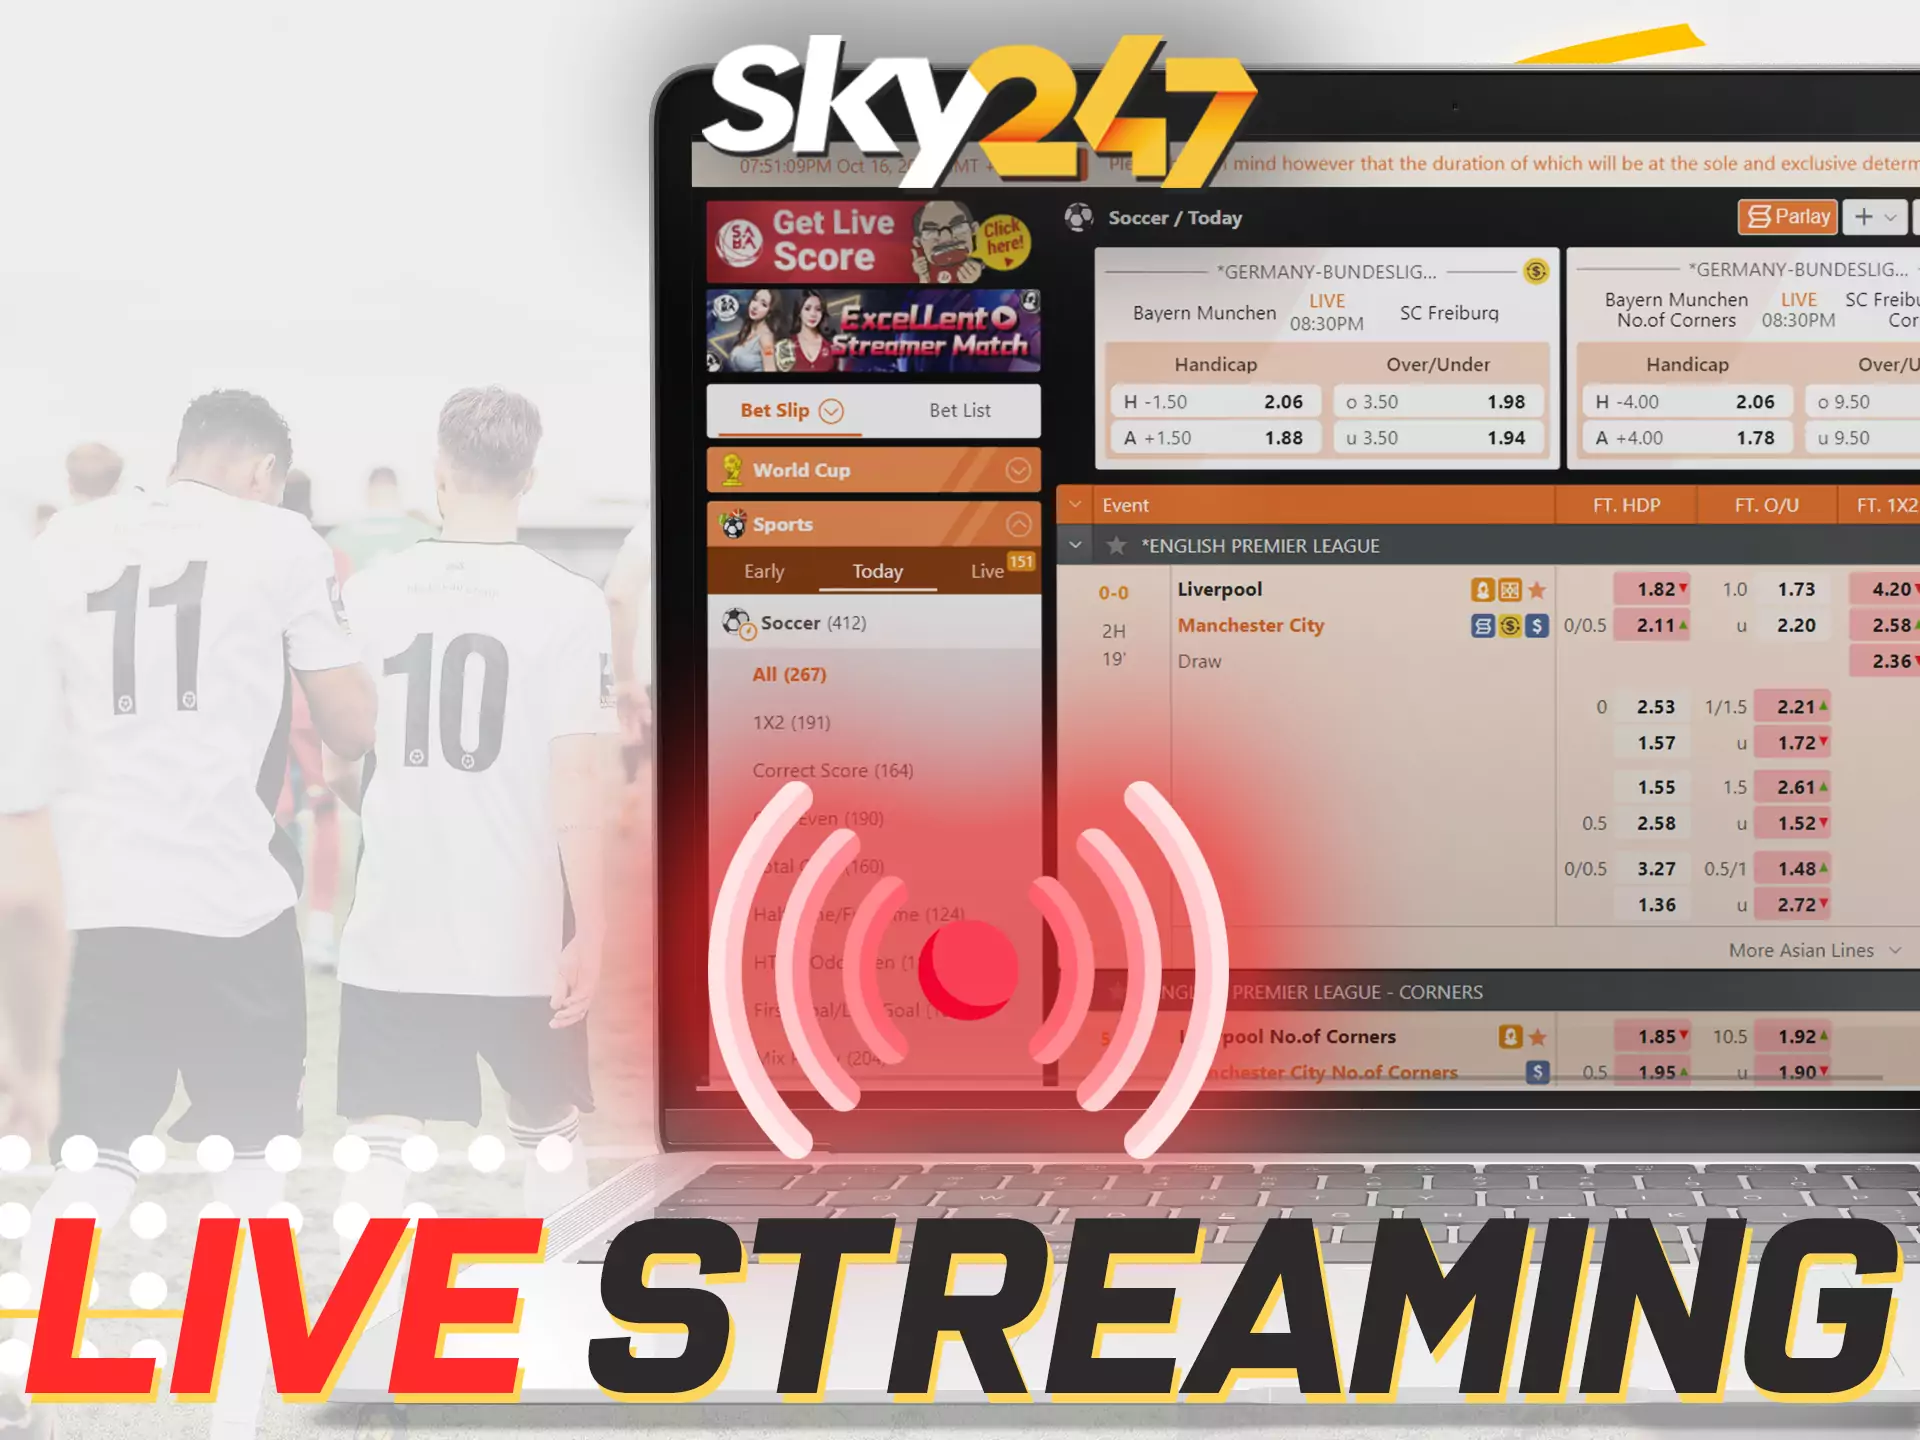 On Sky247, you can follow matches and make live bets.